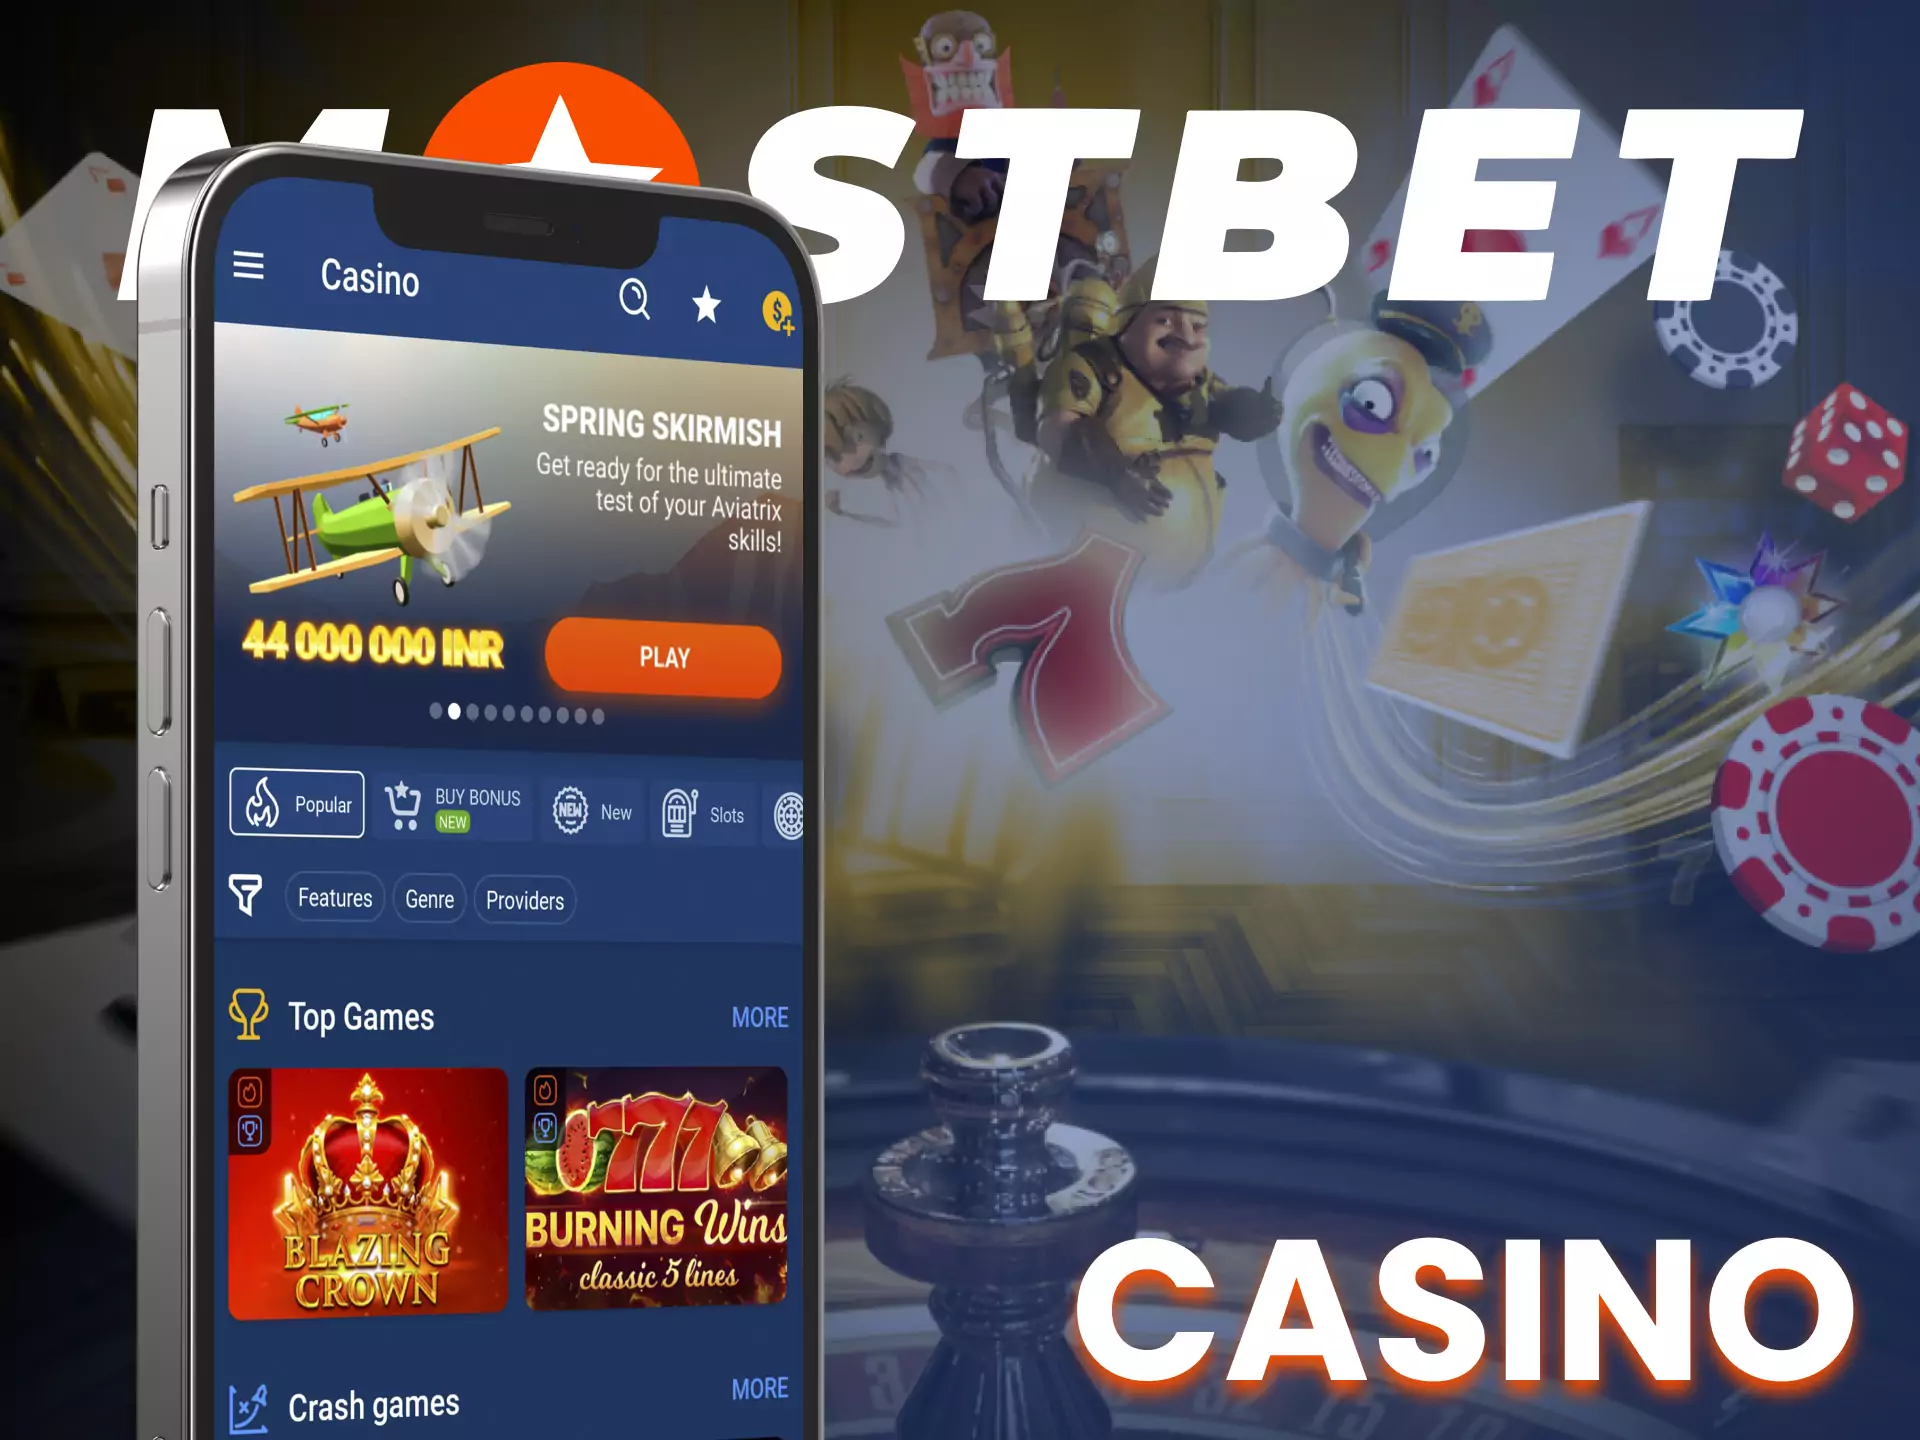 Be sure to visit the Casino section of the Mostbet app.